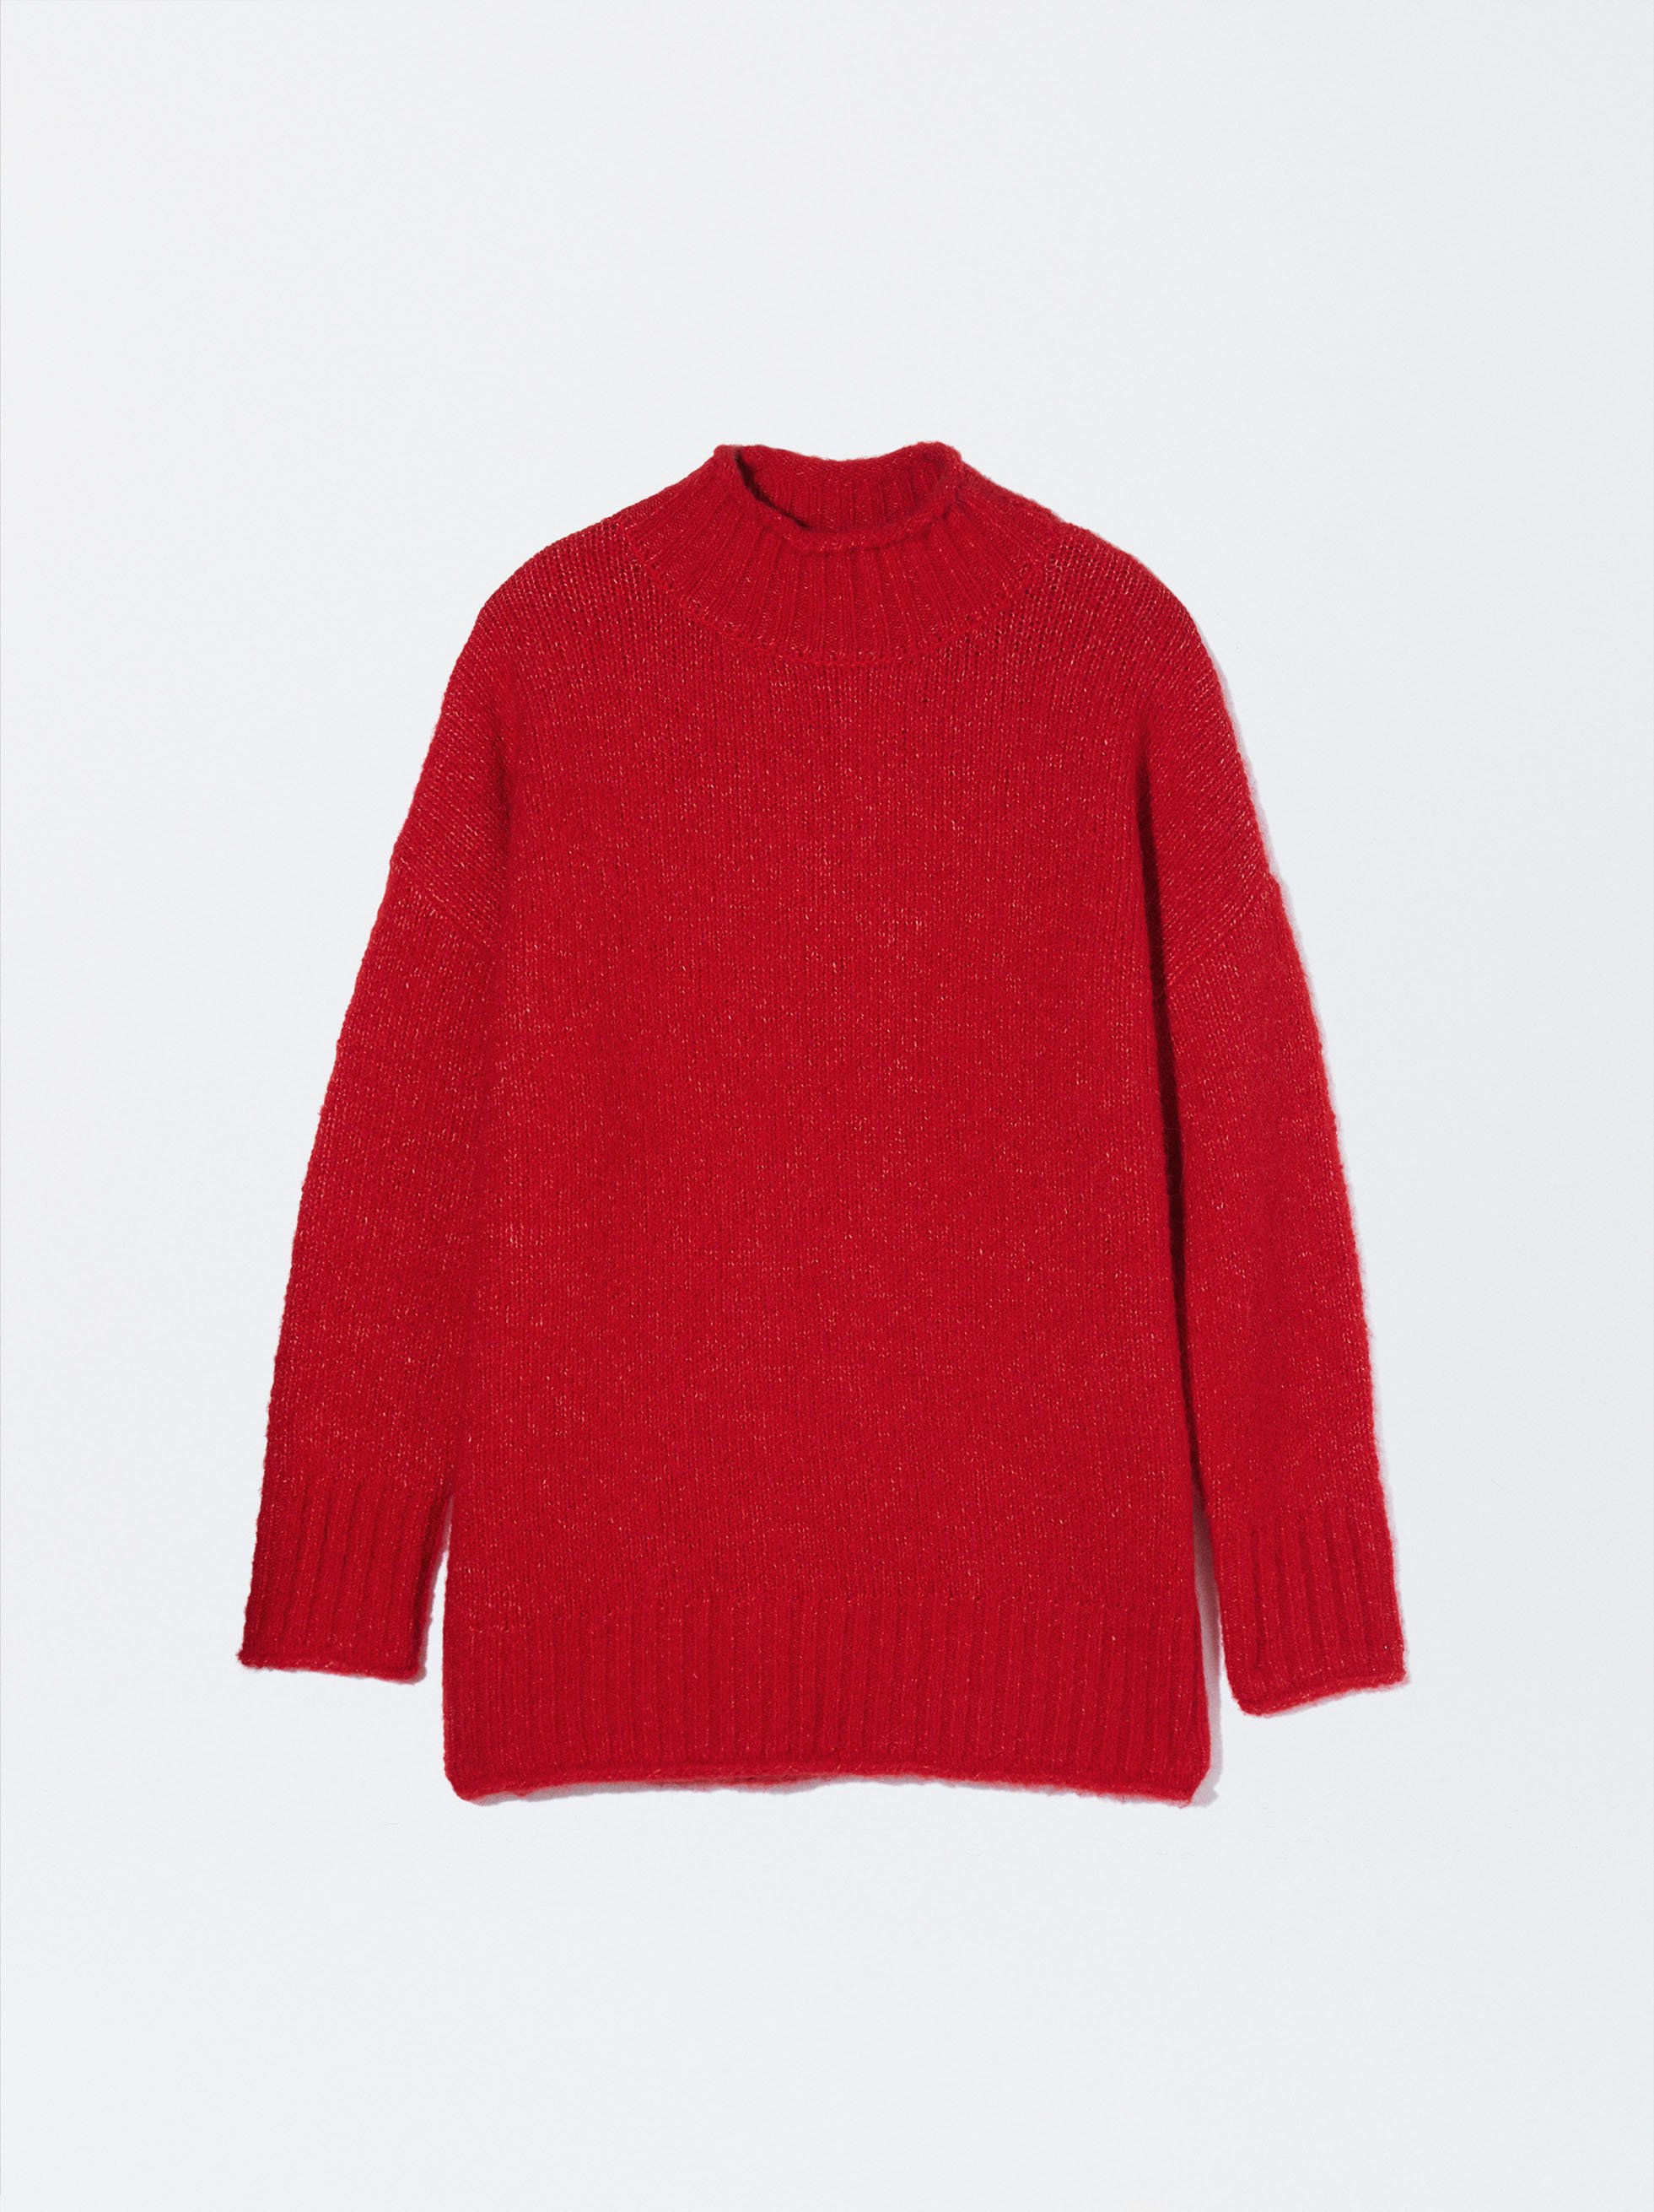 Online Exclusive - Strickpullover Mit Wolle image number 0.0